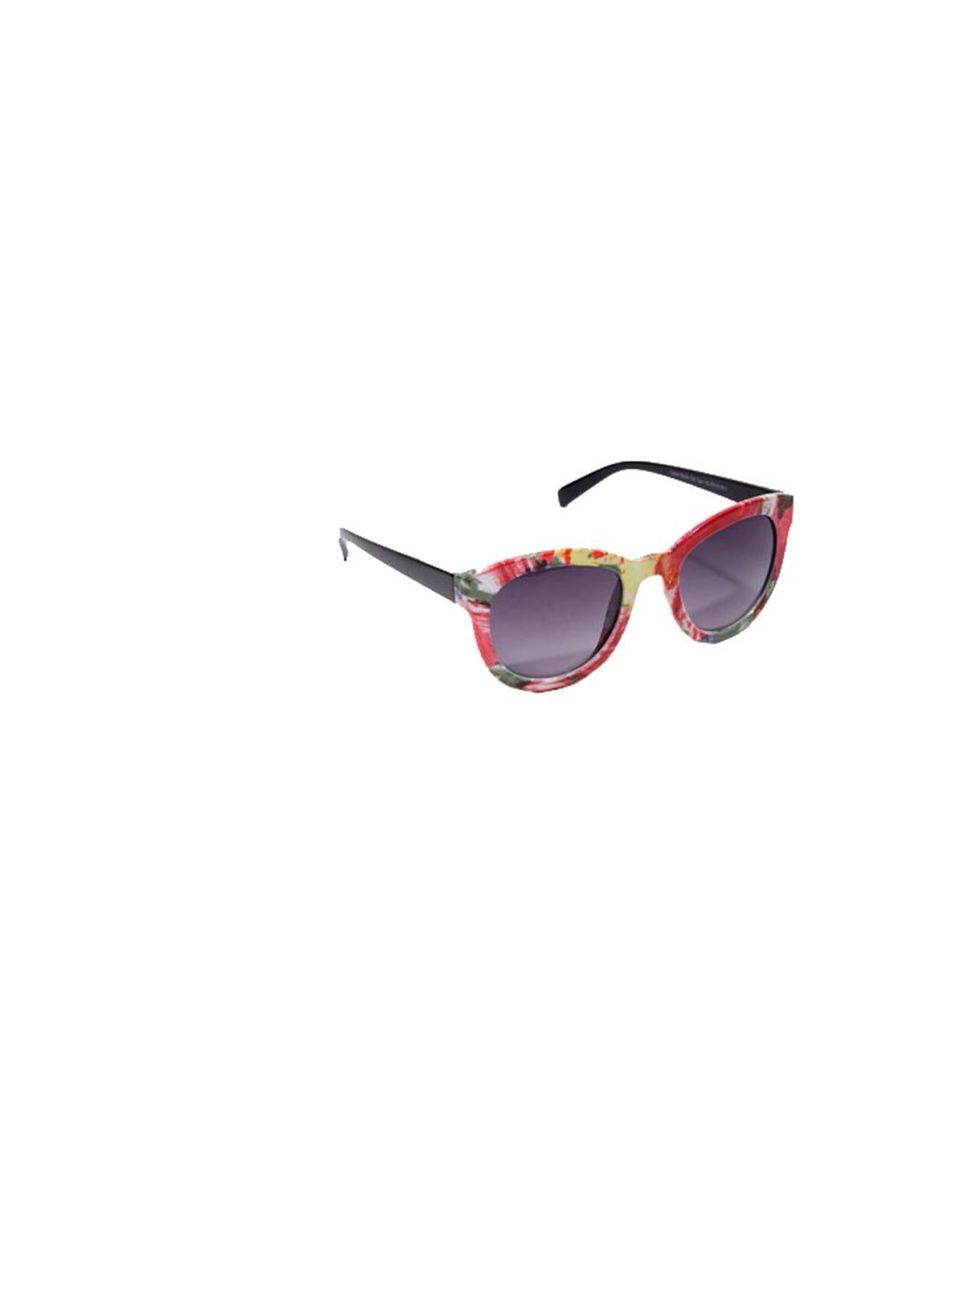 <p>Urban Outfitters printed cat eye sunglasses, £16, at <a href="http://www.urbanoutfitters.co.uk/large-print-cat-eye-sunglasses/invt/5758436781215/&amp;bklis">Urban Outfitters</a></p>